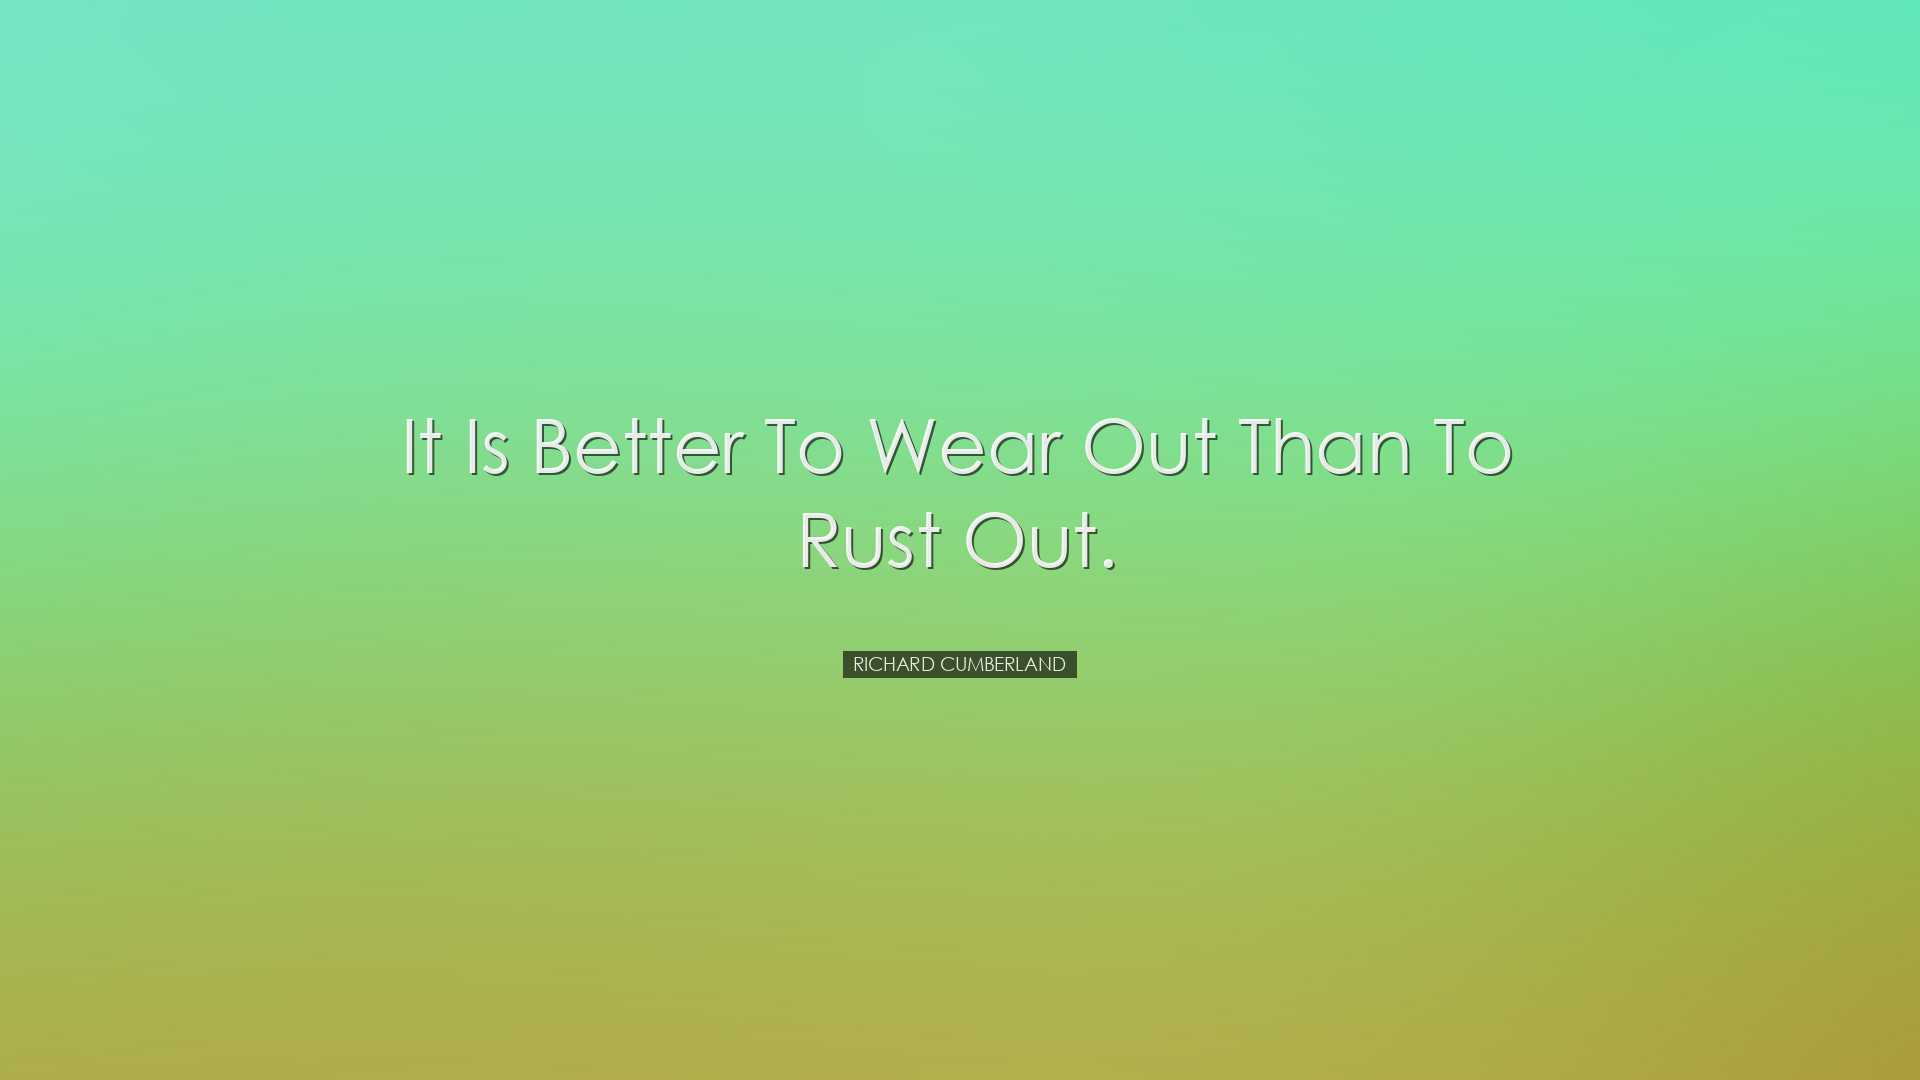 It is better to wear out than to rust out. - Richard Cumberland